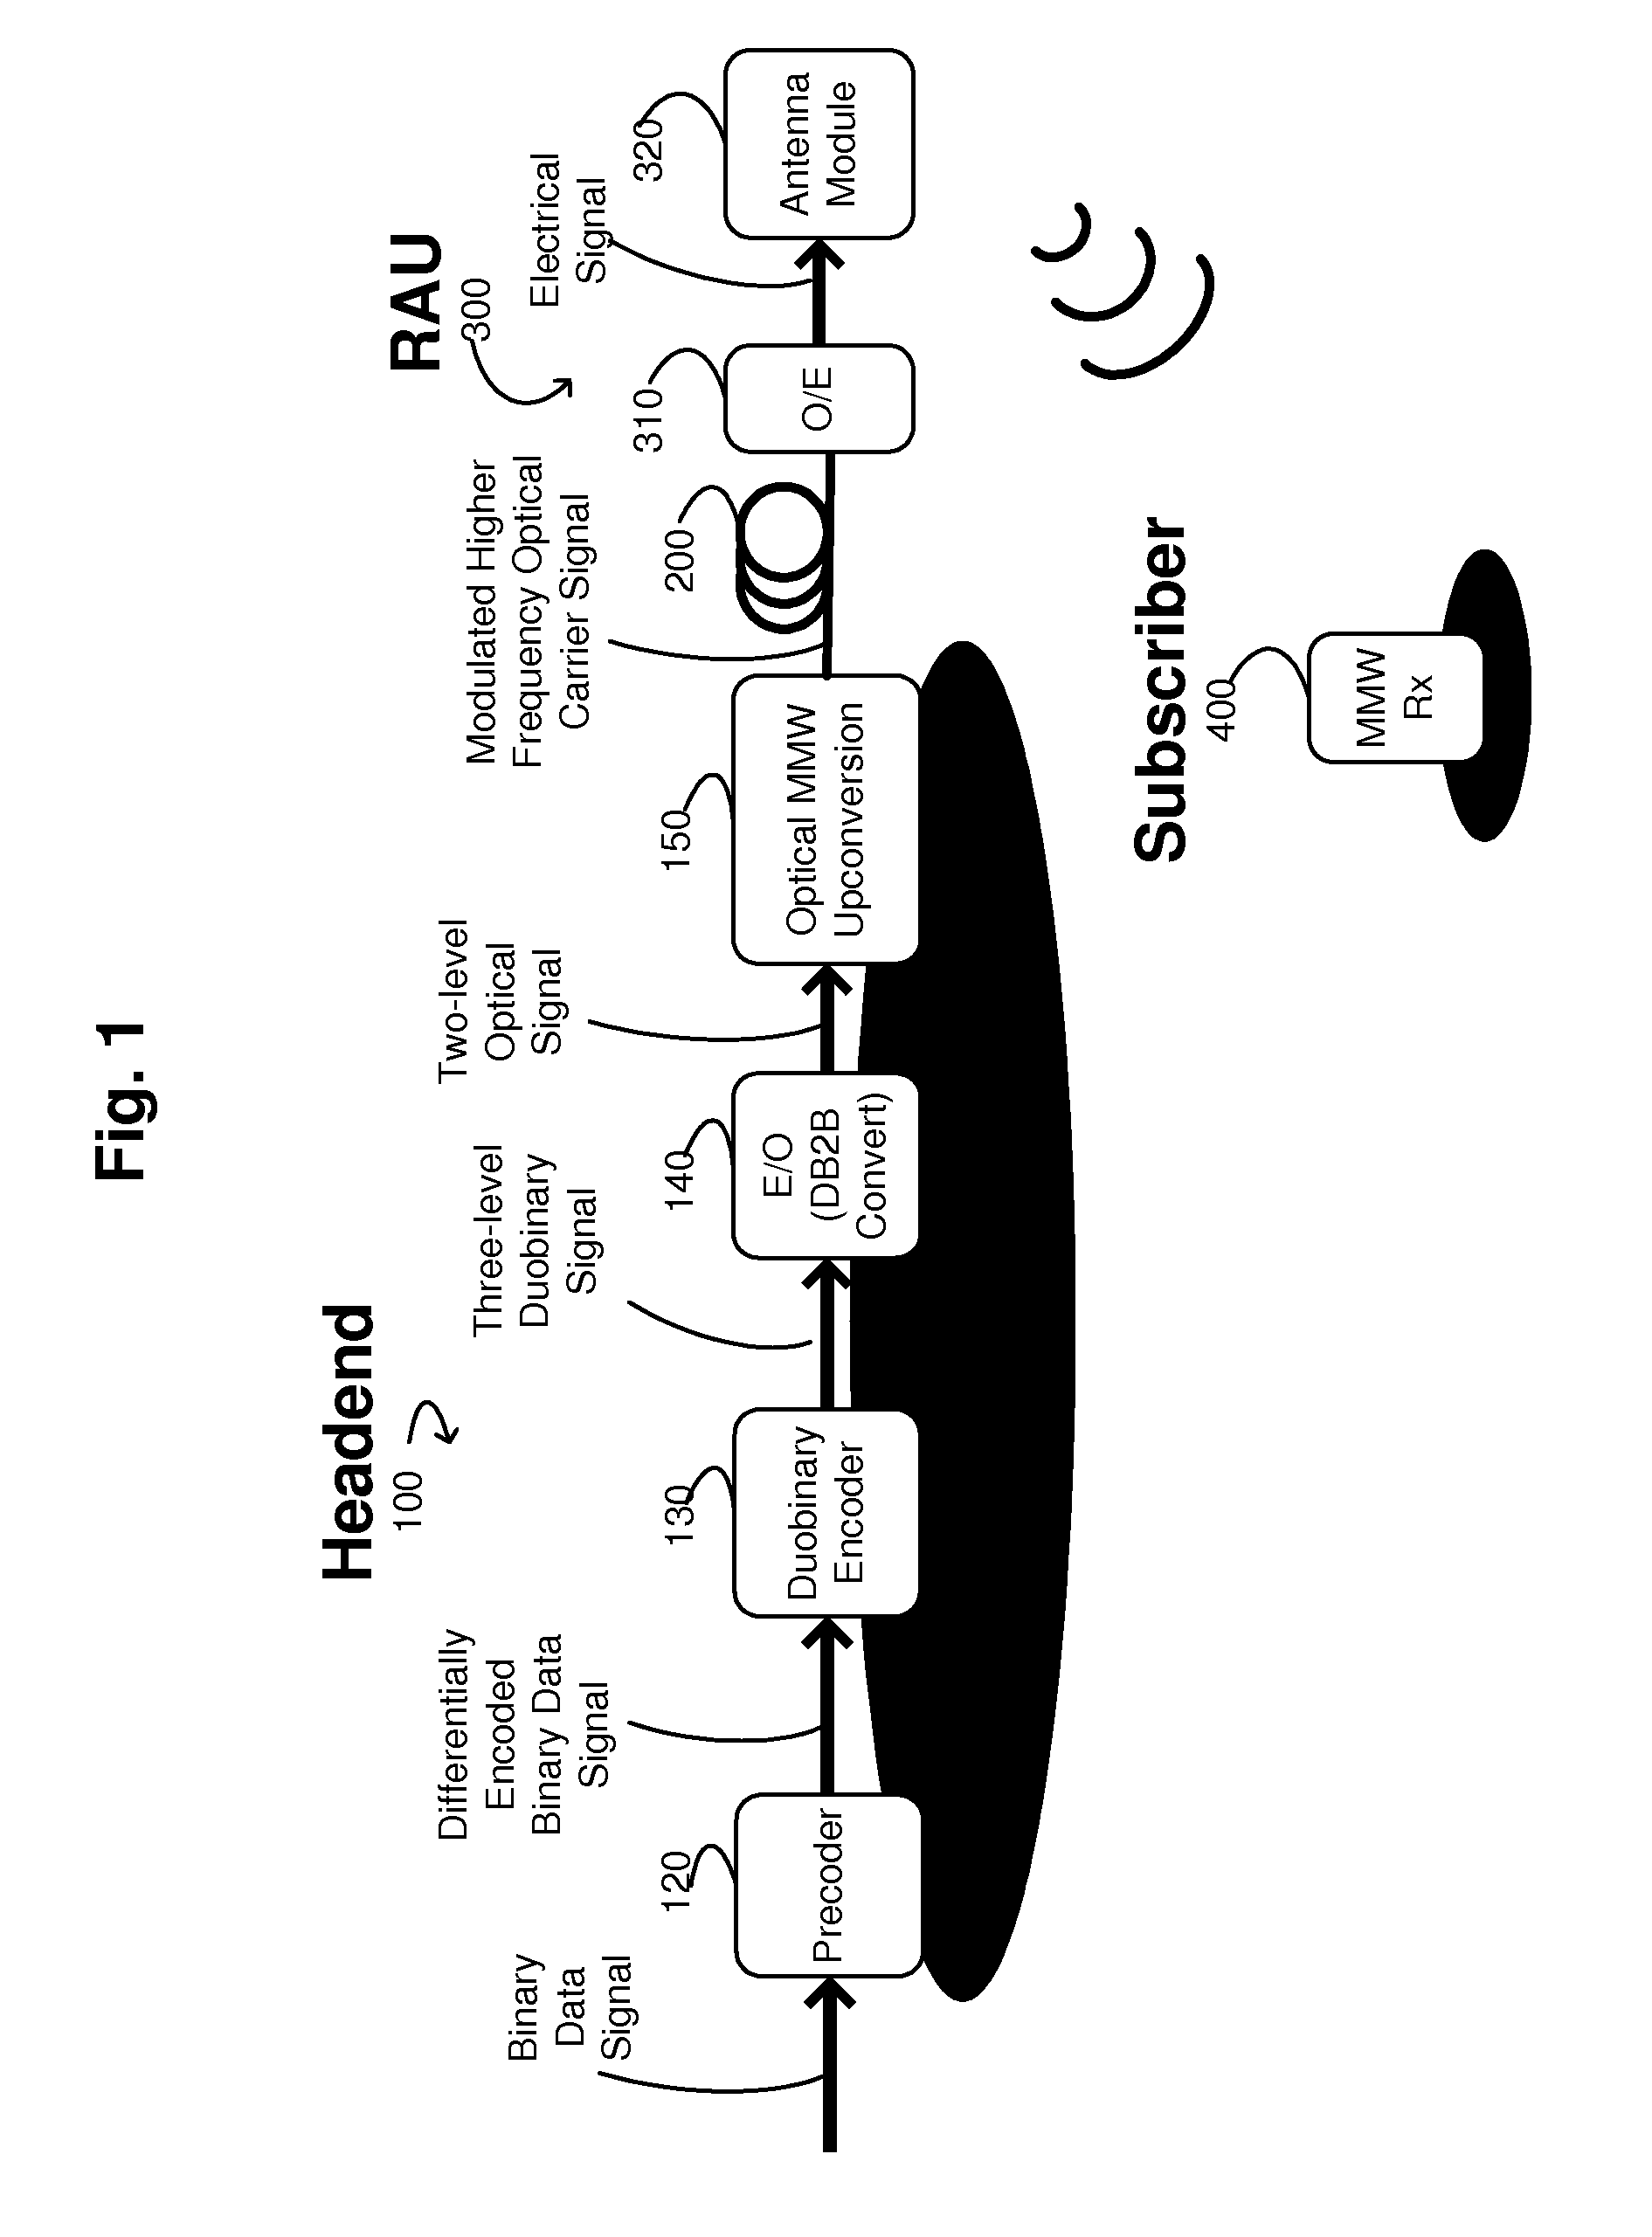 Systems and methods for providing an optical information transmission system